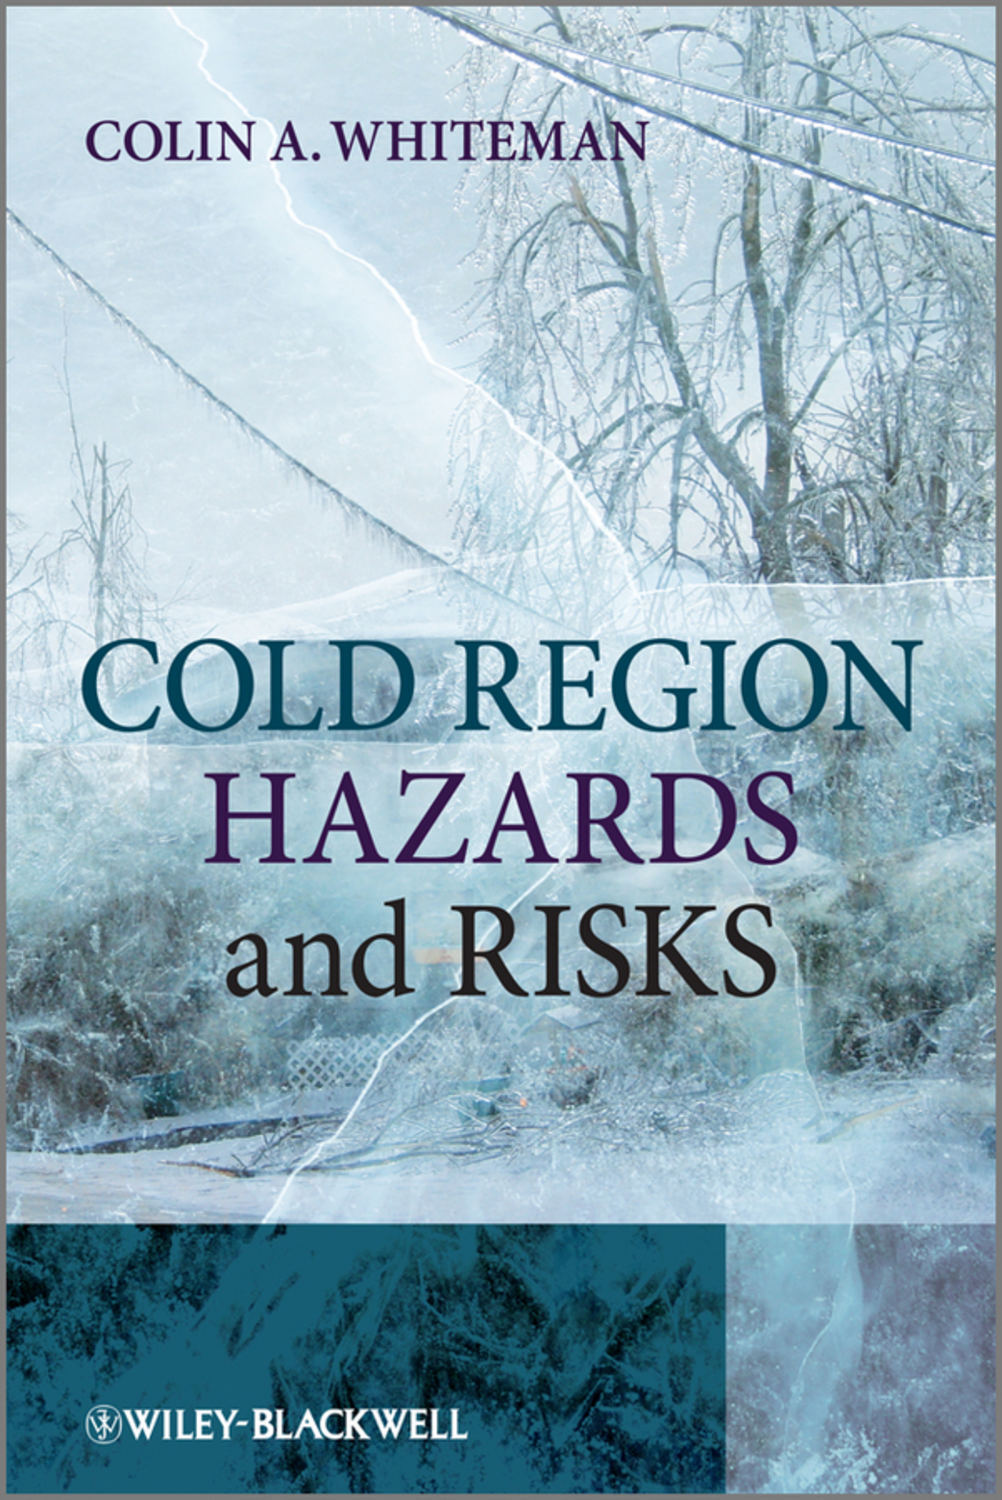 Cold book. Cold Region Hazards and risks.